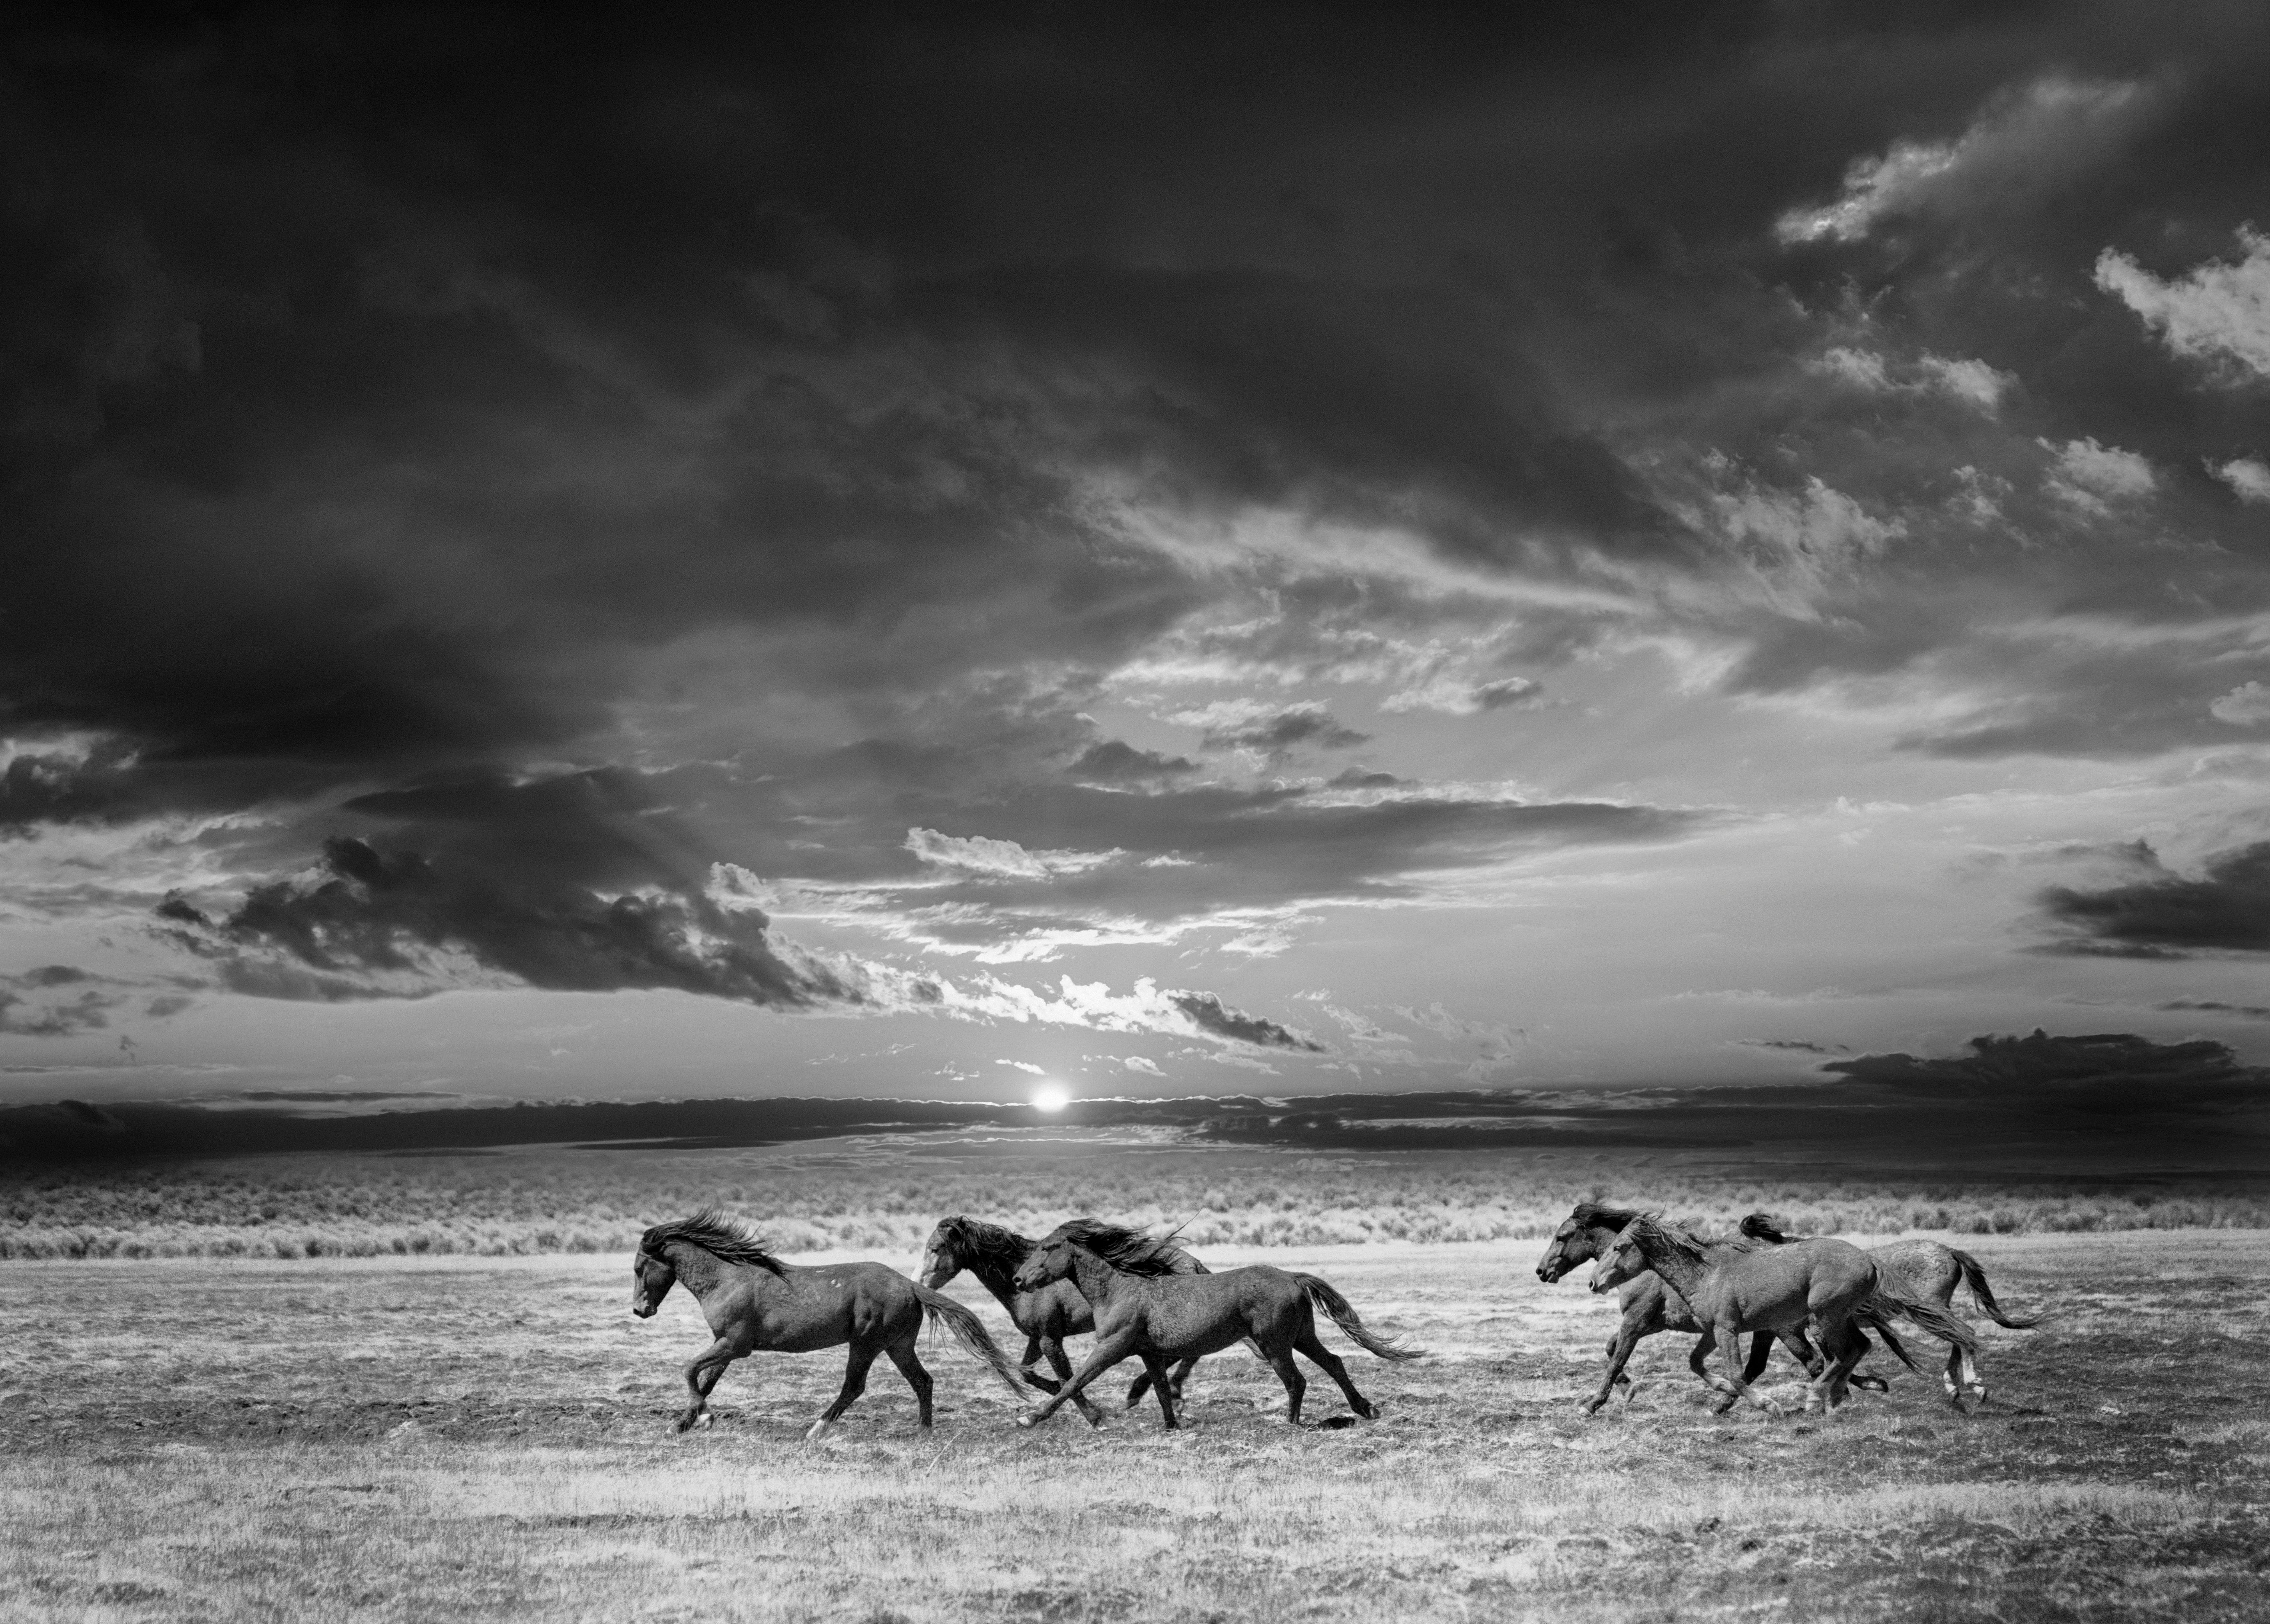 Shane Russeck Black and White Photograph - Chasing the Light  36 x 48 Photography of Wild Horses - Unsigned Test Print